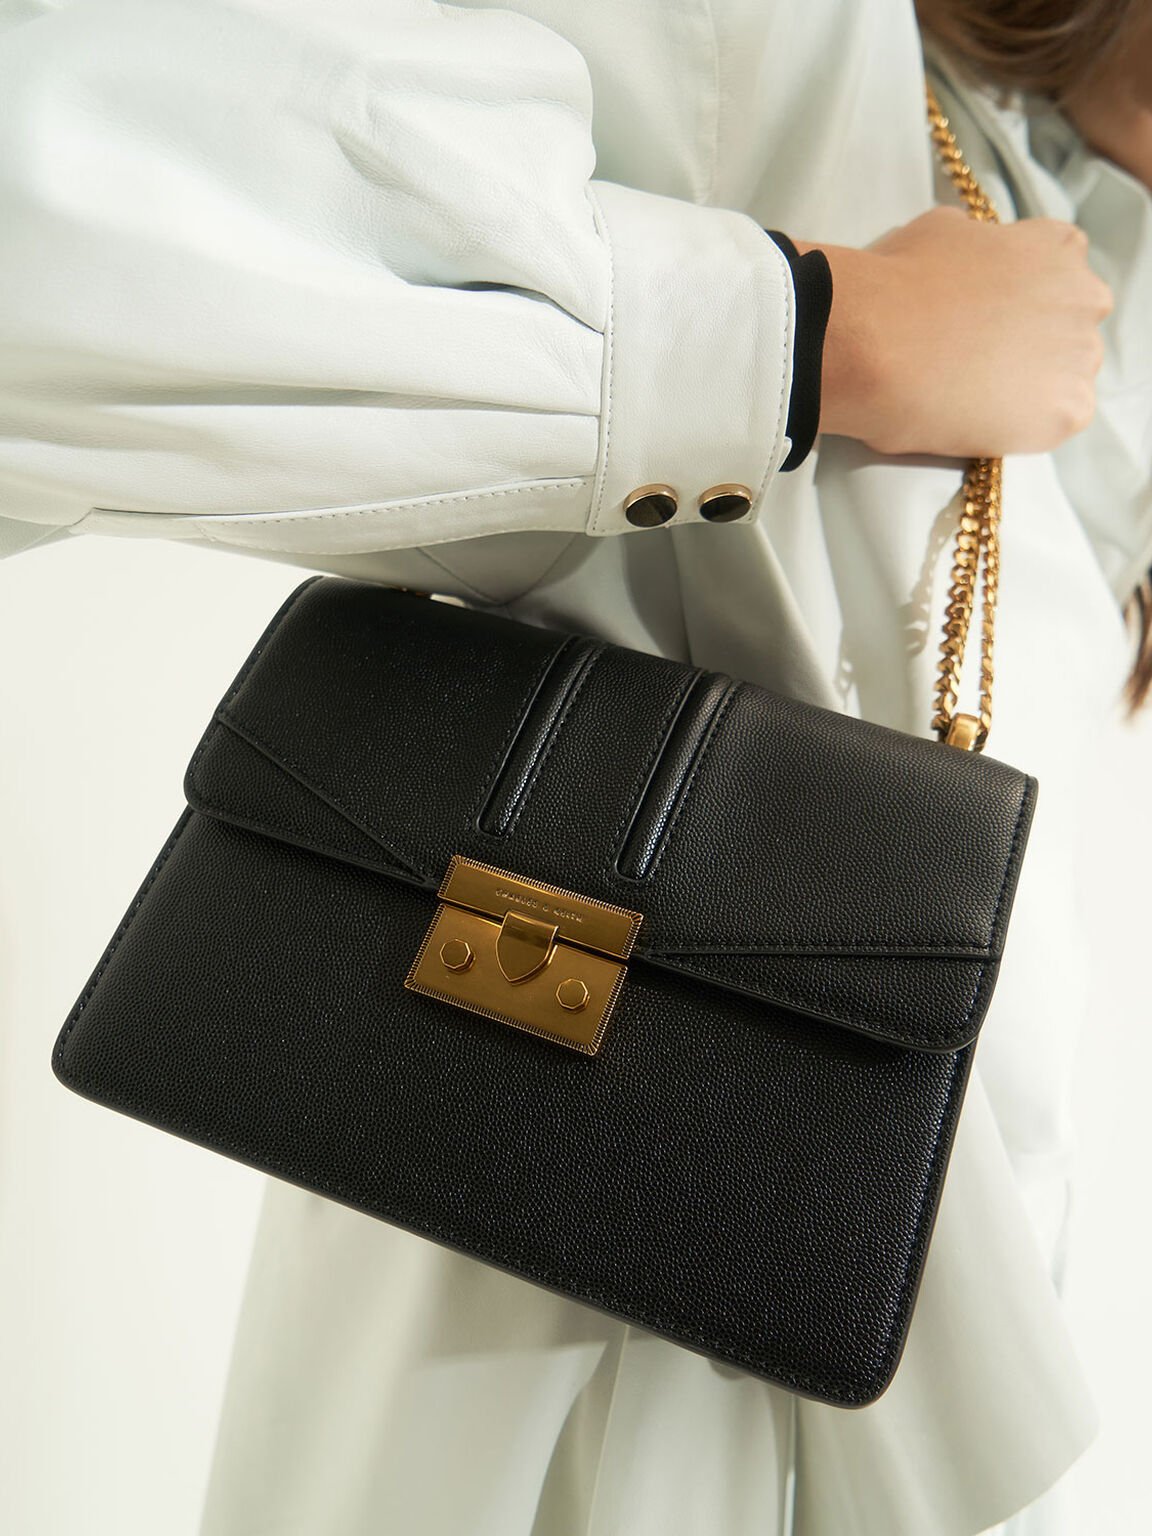 Popular Bags That Make The Brand CHARLES & KEITH